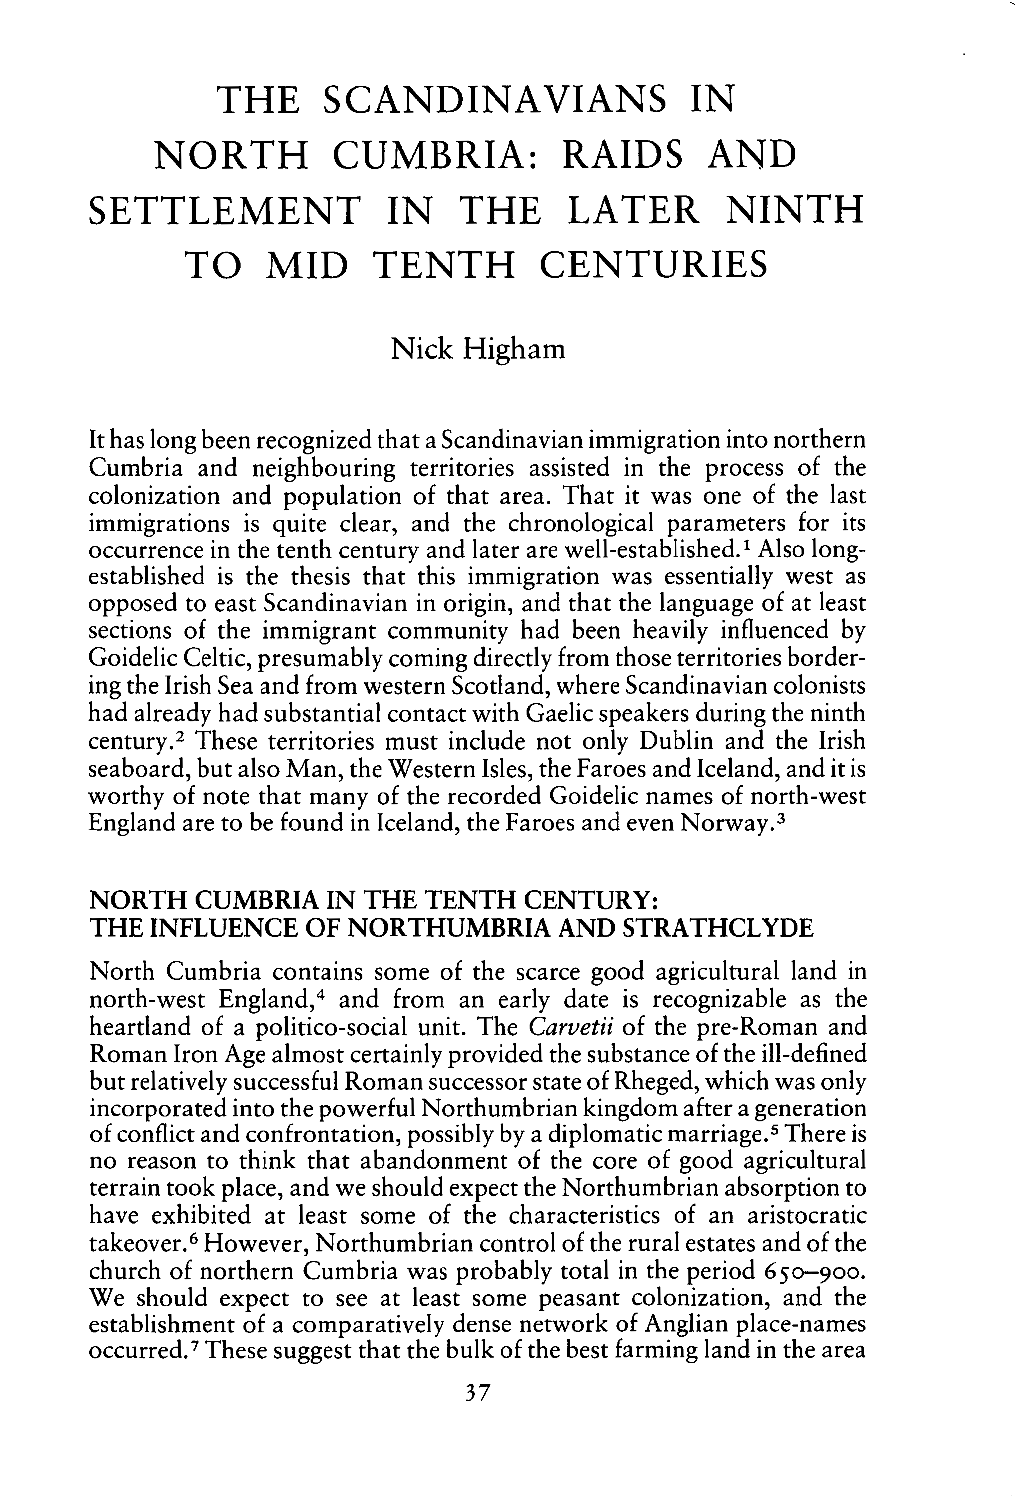 The Scandinavians in North Cumbria: Raids and Settlement in the Later Ninth to Mid Tenth Centuries